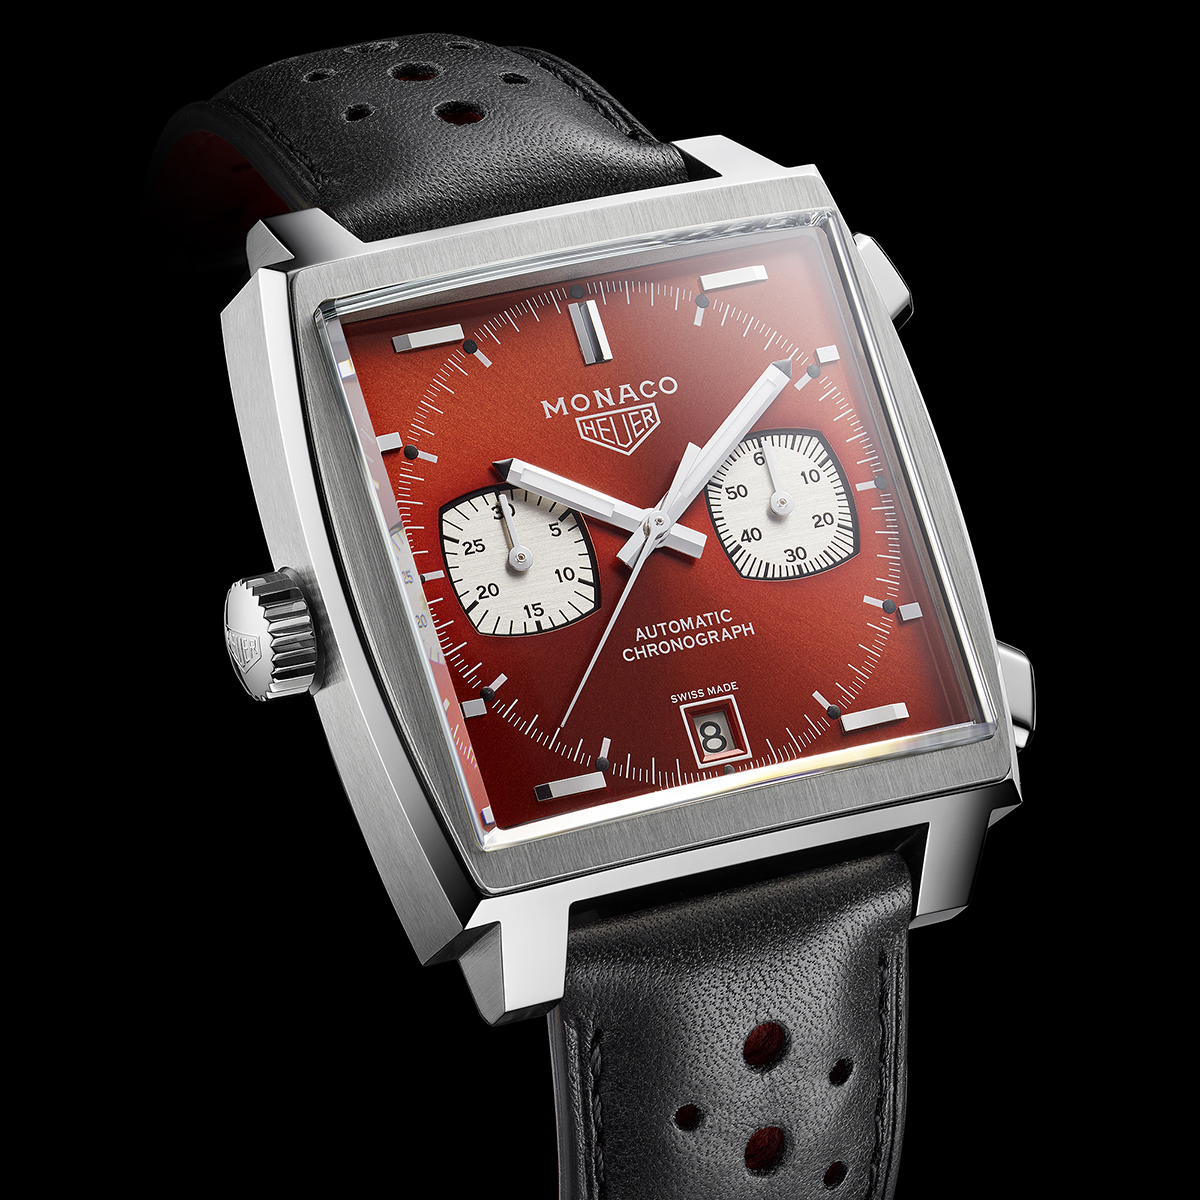 Luxurious watch with red face and black strap